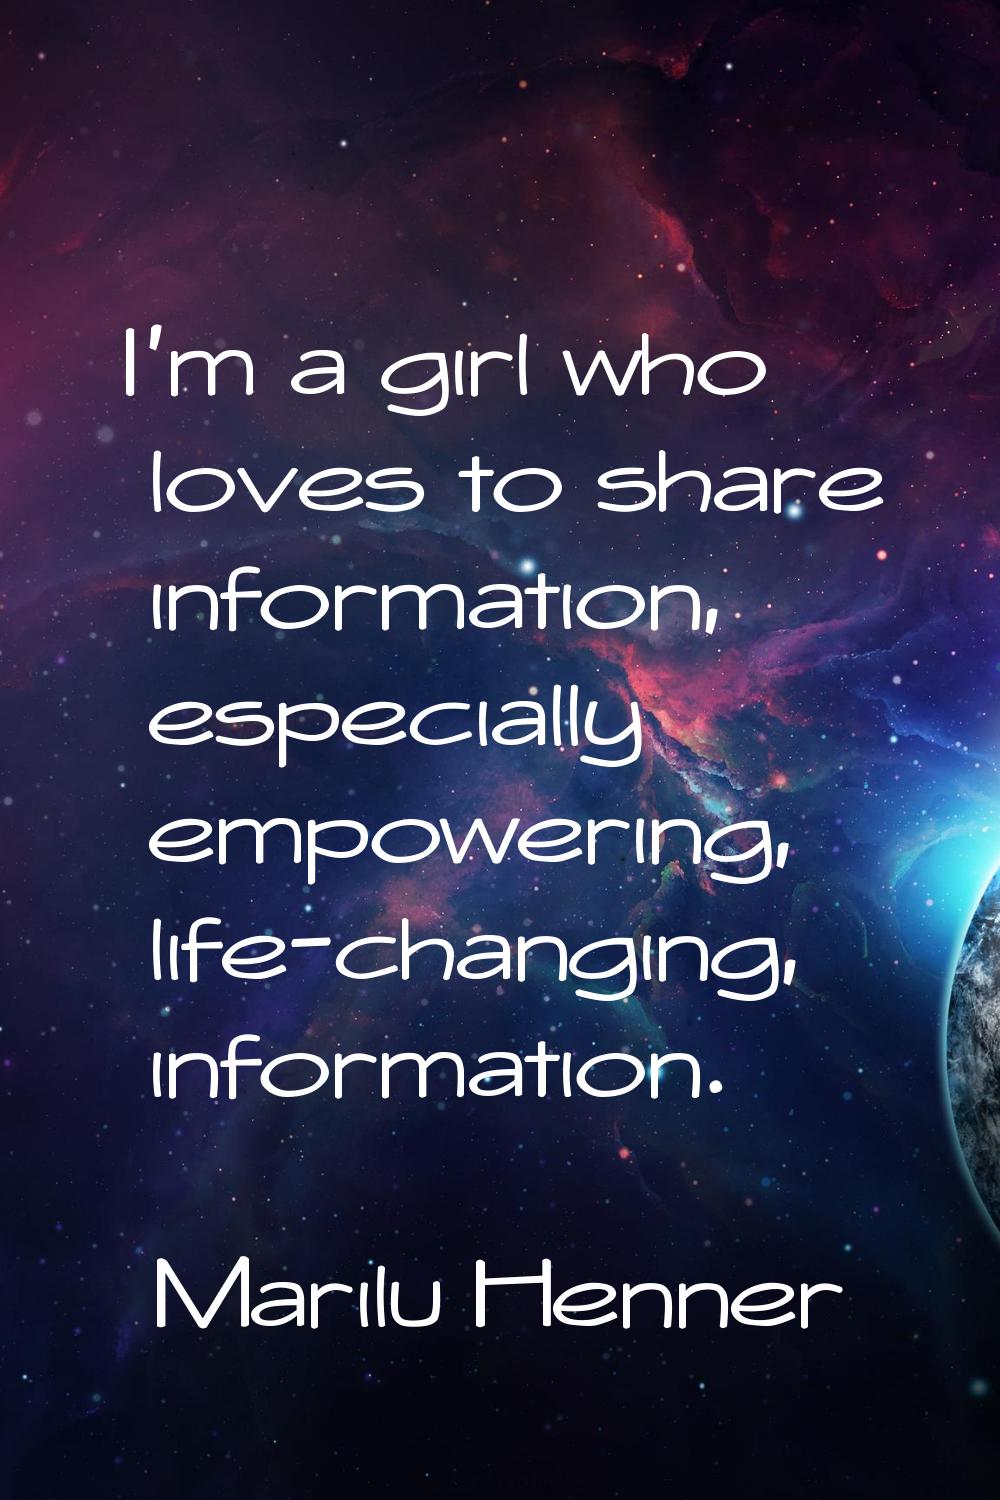 I'm a girl who loves to share information, especially empowering, life-changing, information.